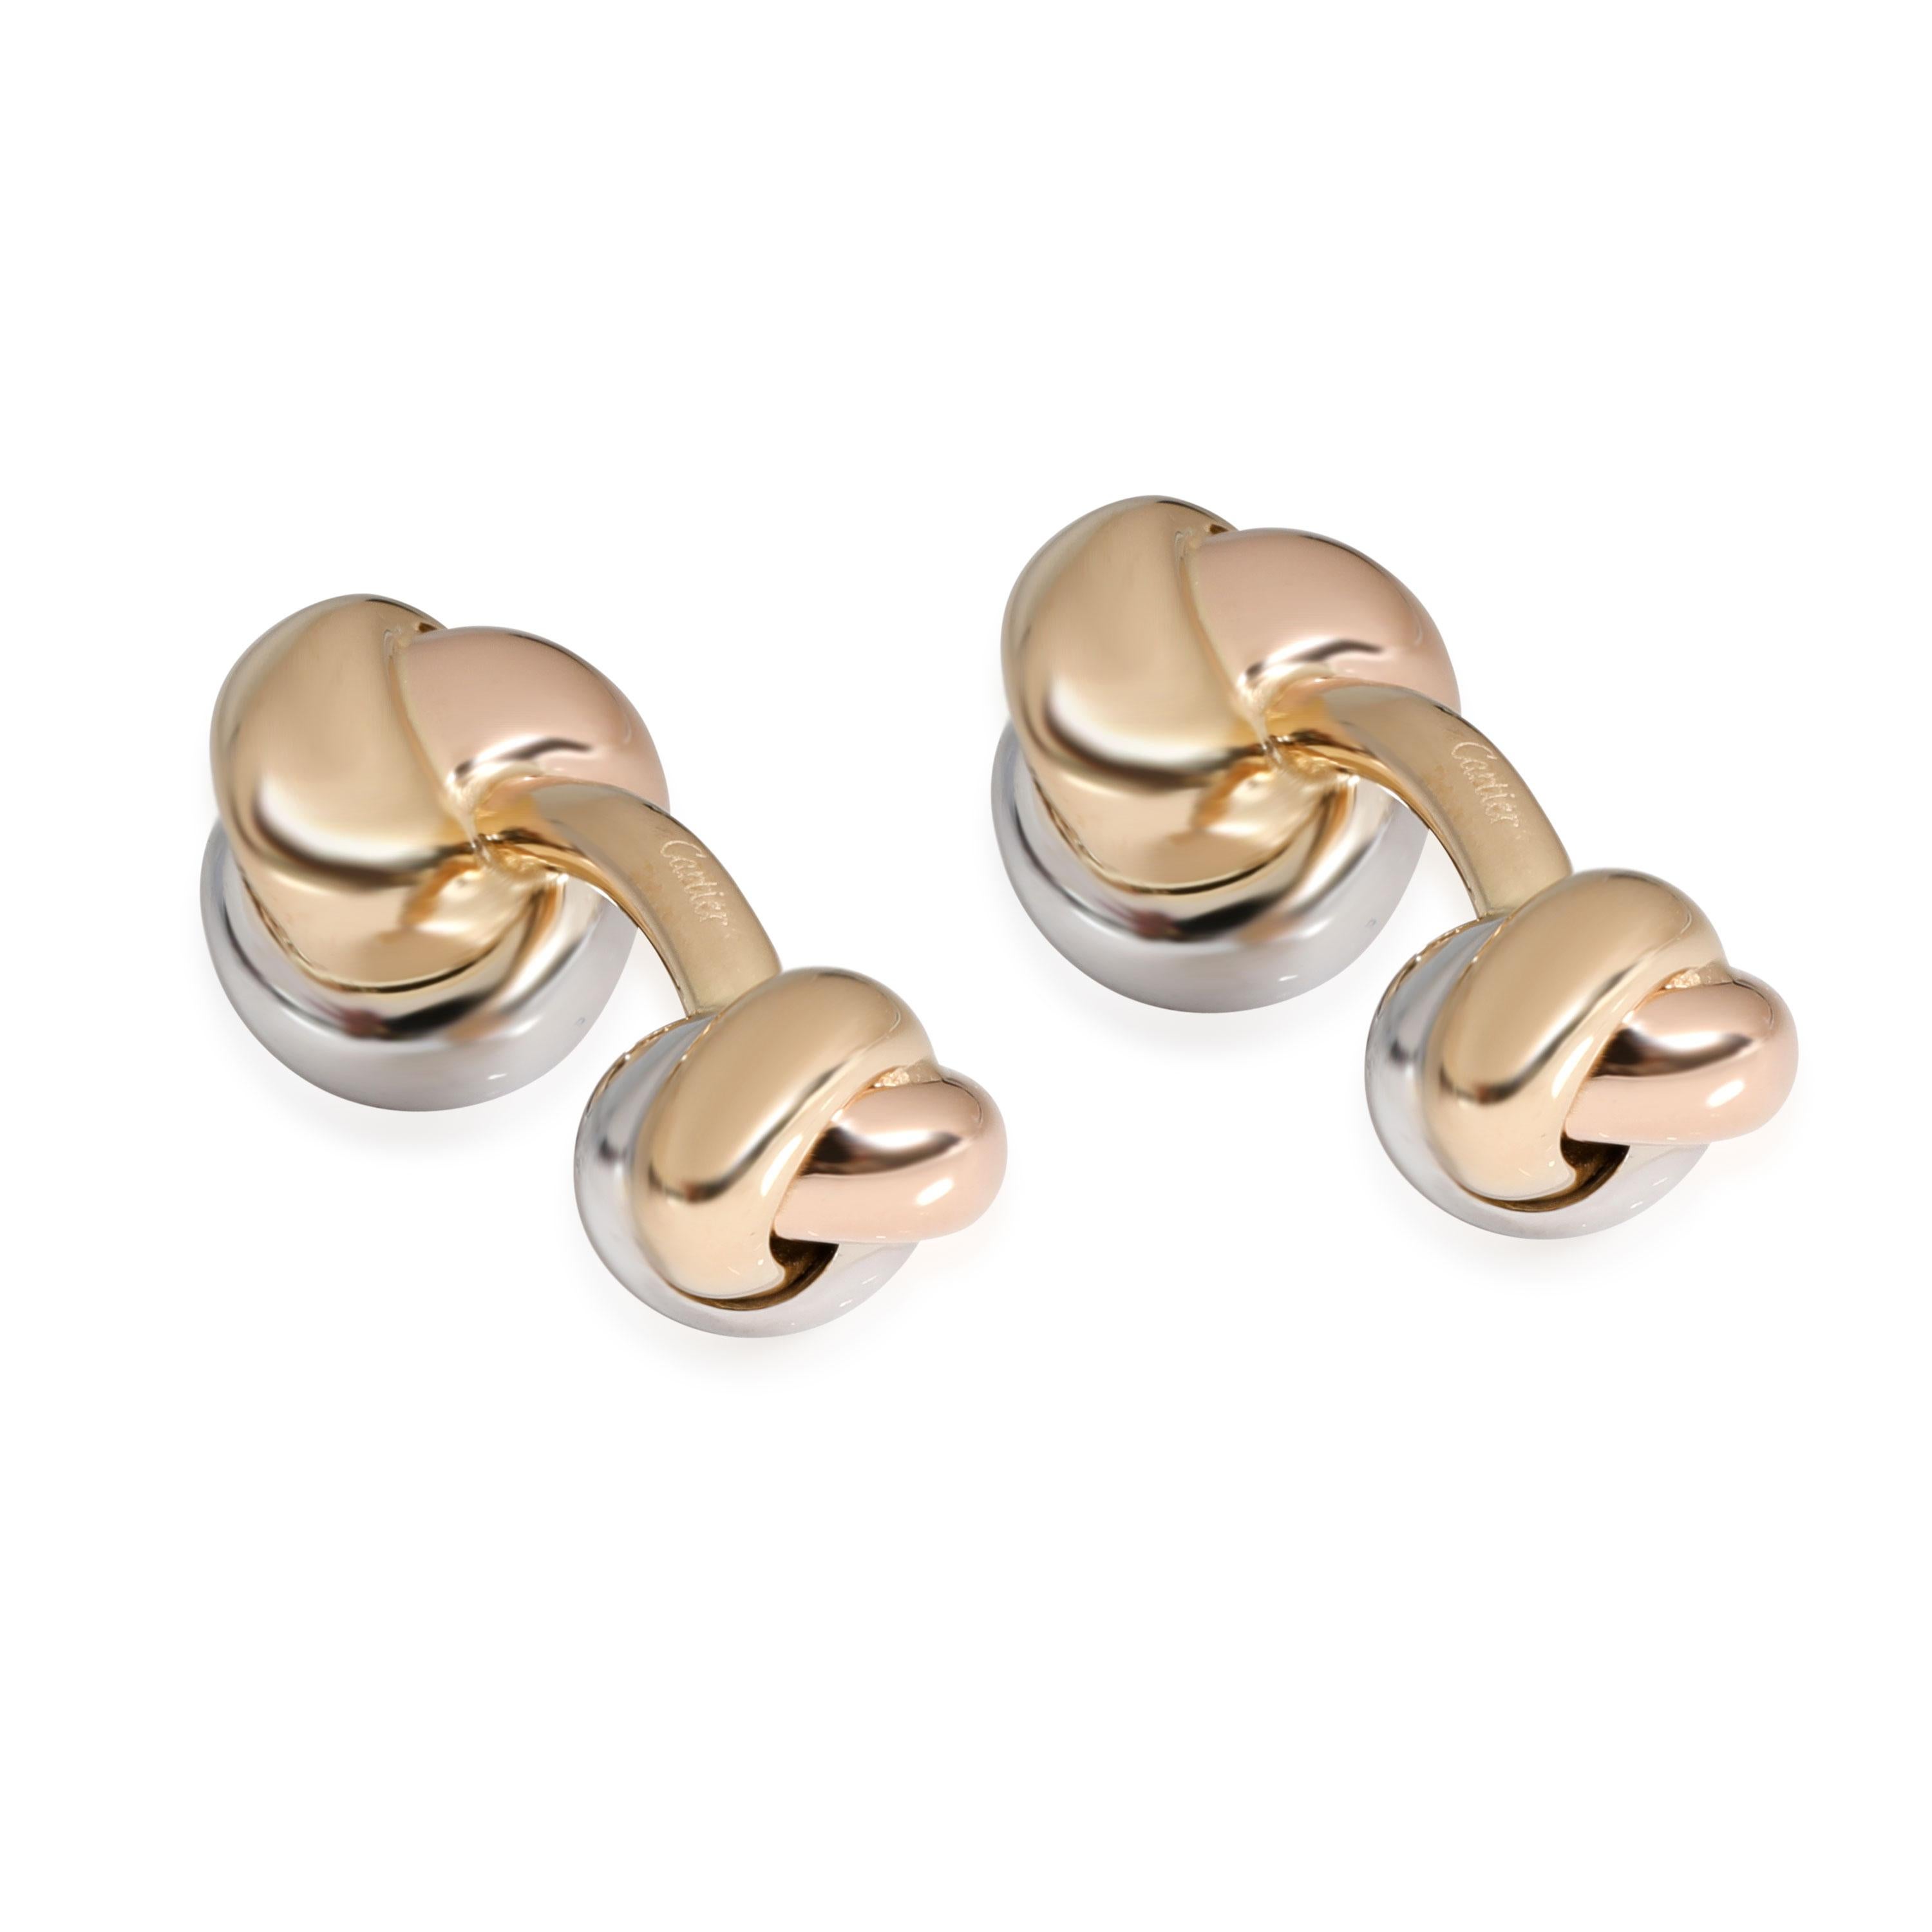 Cartier Trinity Cufflinks in 18K 3 Tone Gold

PRIMARY DETAILS
SKU: 117380
Listing Title: Cartier Trinity Cufflinks in 18K 3 Tone Gold
Condition Description: Retails for 4250 USD. In excellent condition and recently polished. Comes with Box.
Brand: